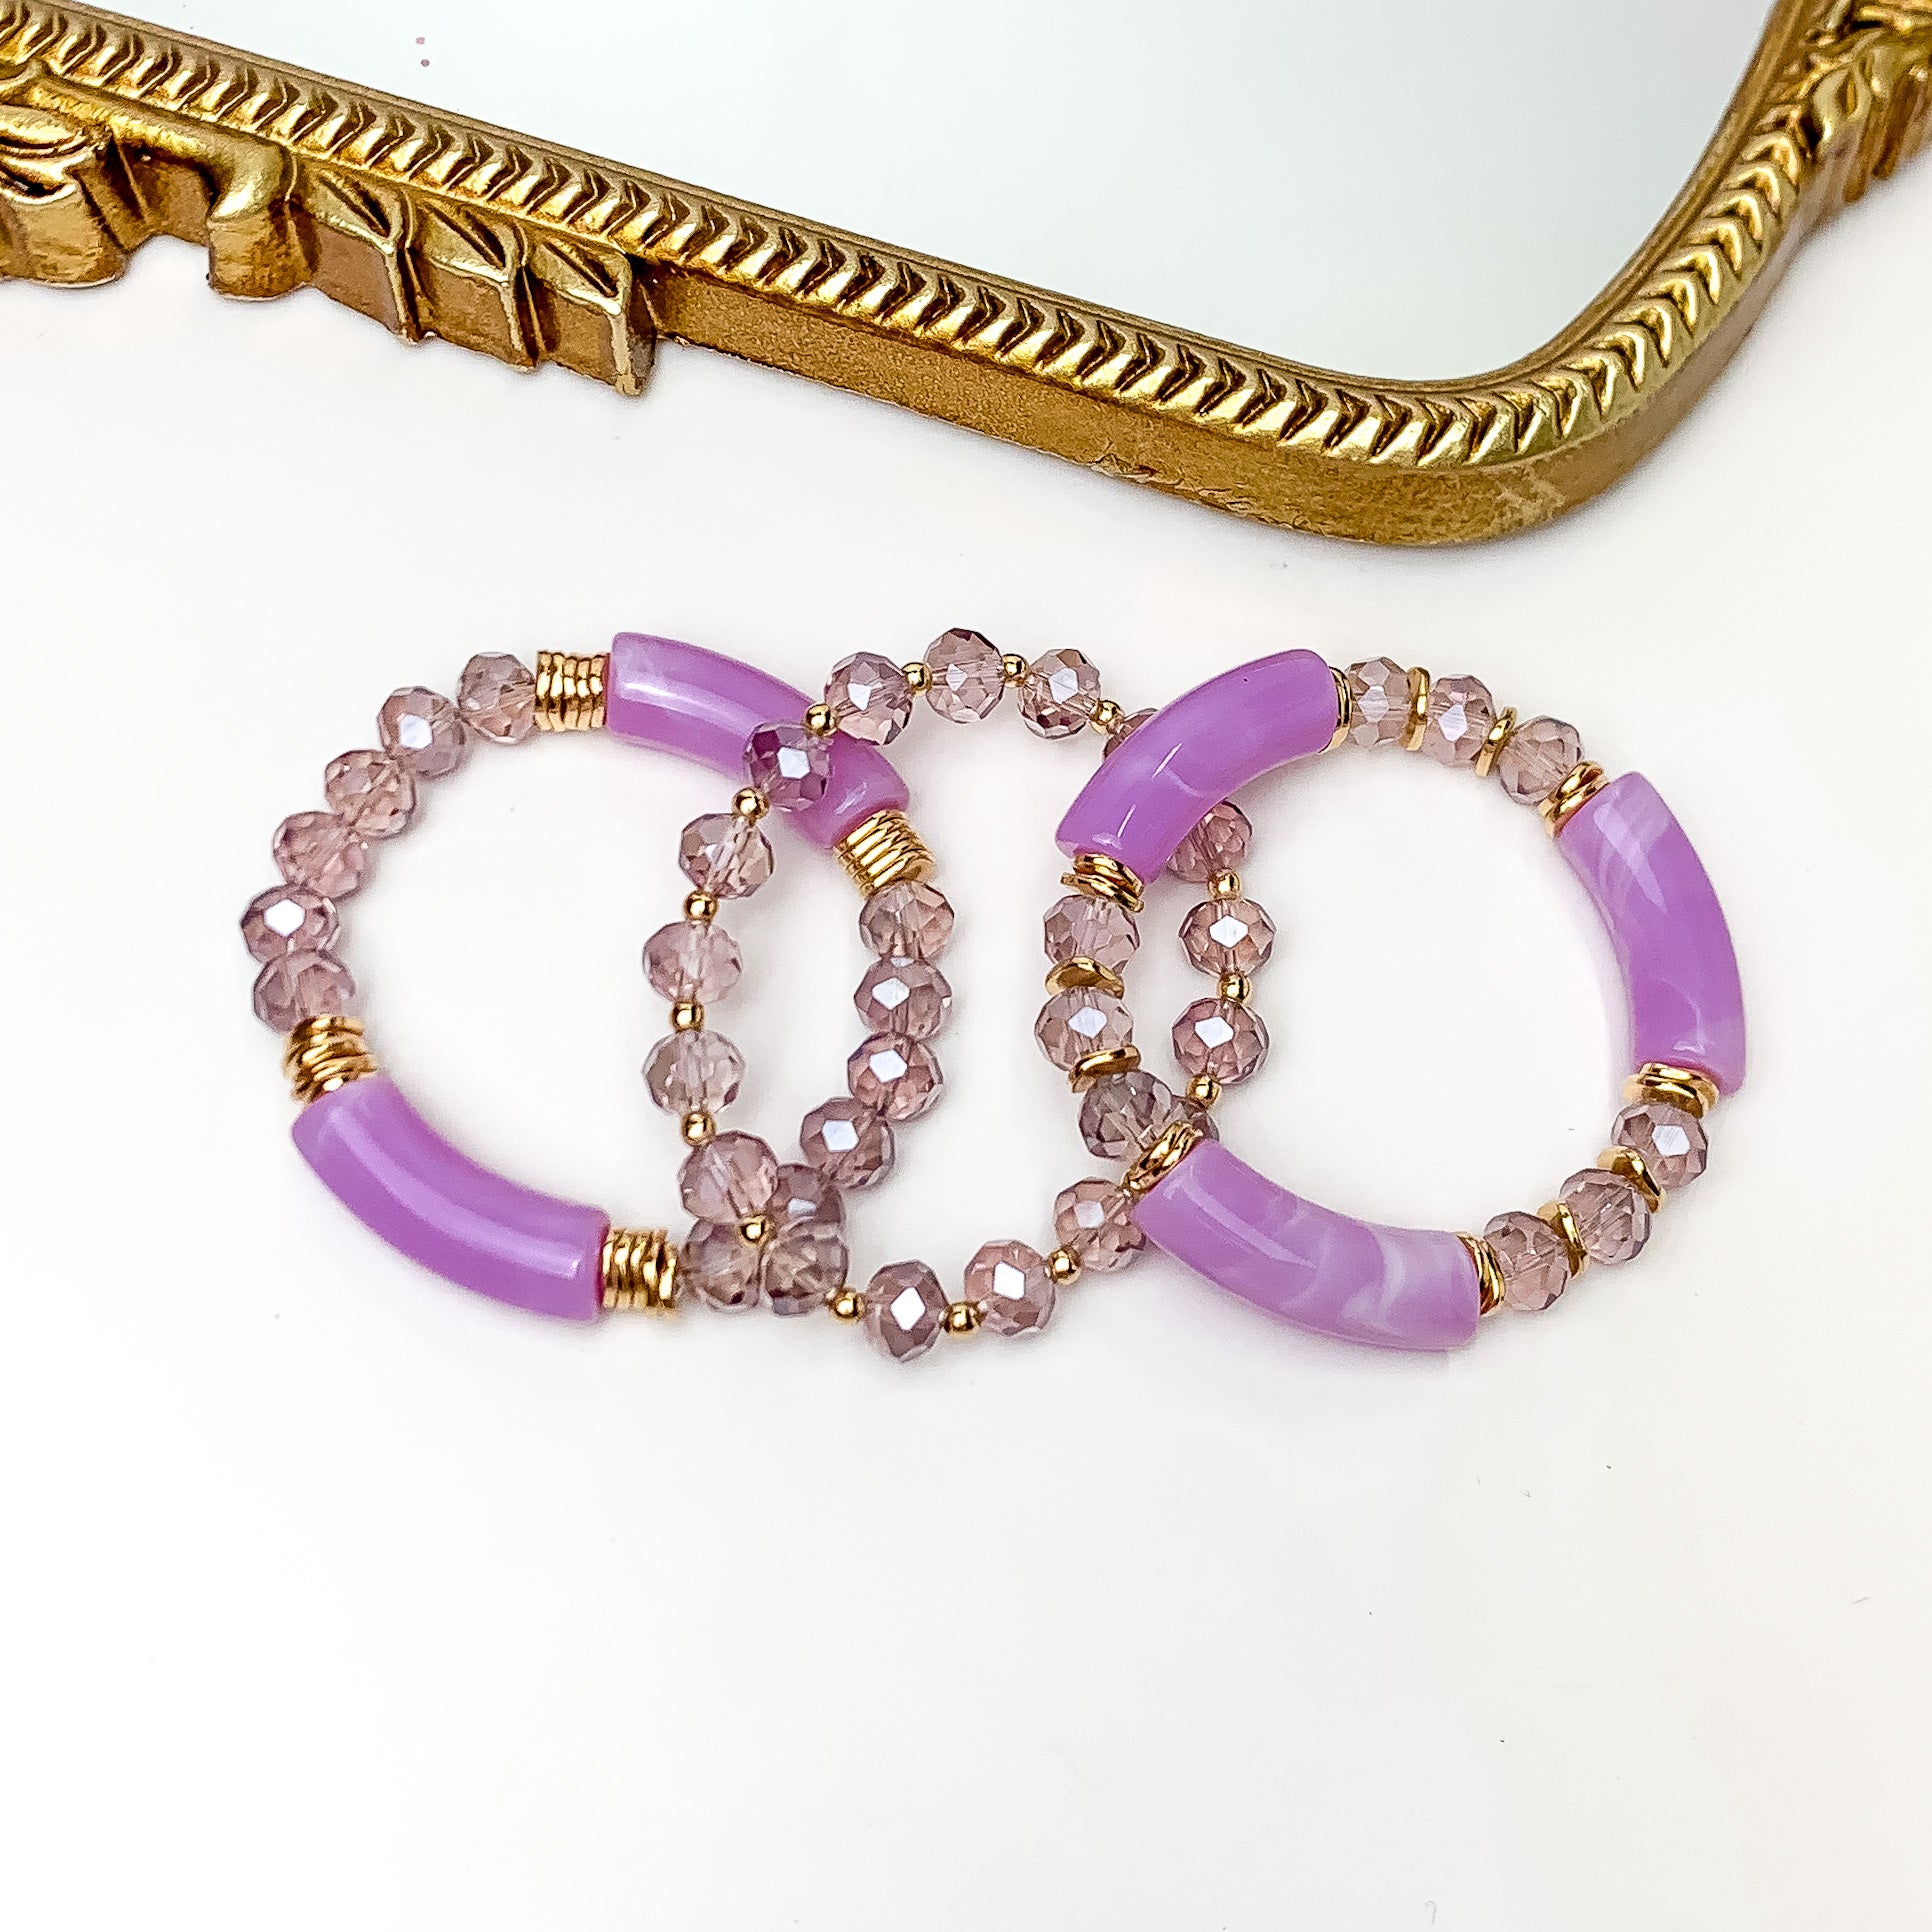 Set of Three | Sunny Bliss Crystal Beaded Bracelet Set in Purple. Pictured on a white background with a gold trim mirror above the bracelets.